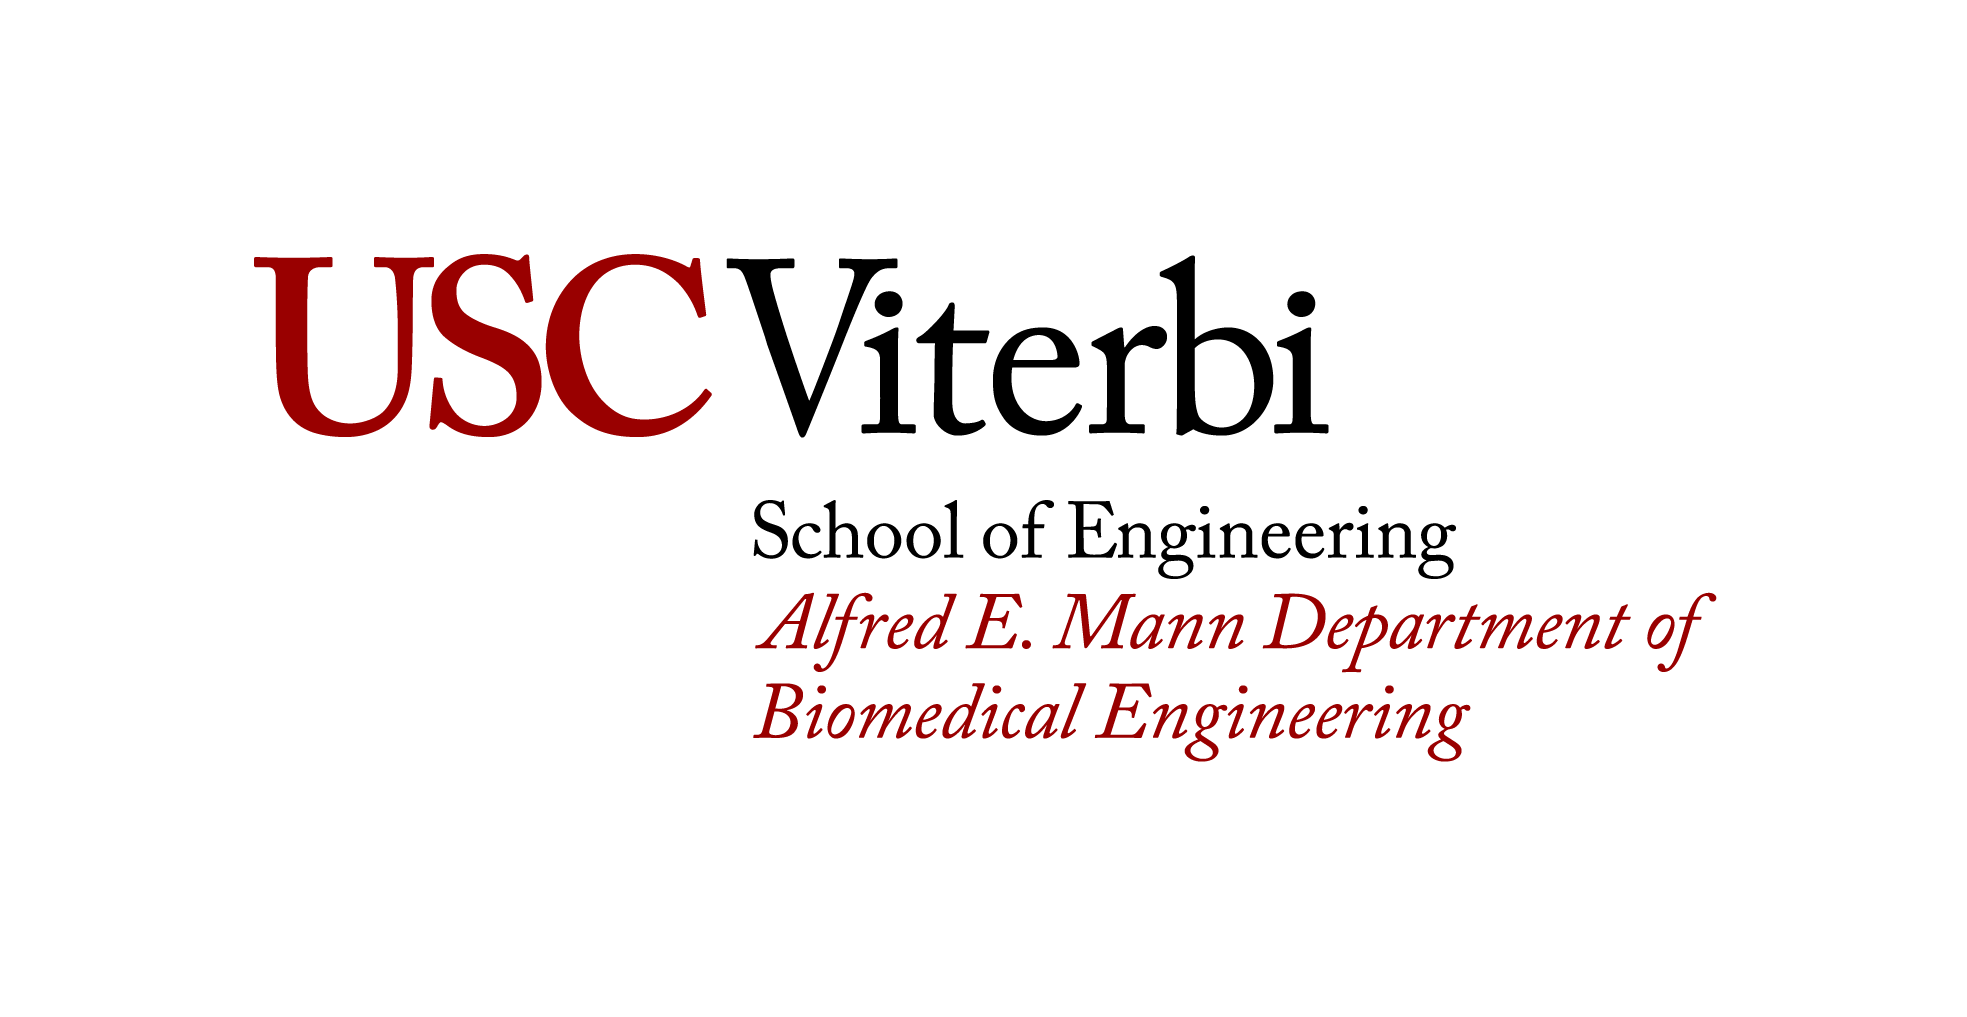 The new logo for the Alfred E. Mann Department of Biomedical Engineering